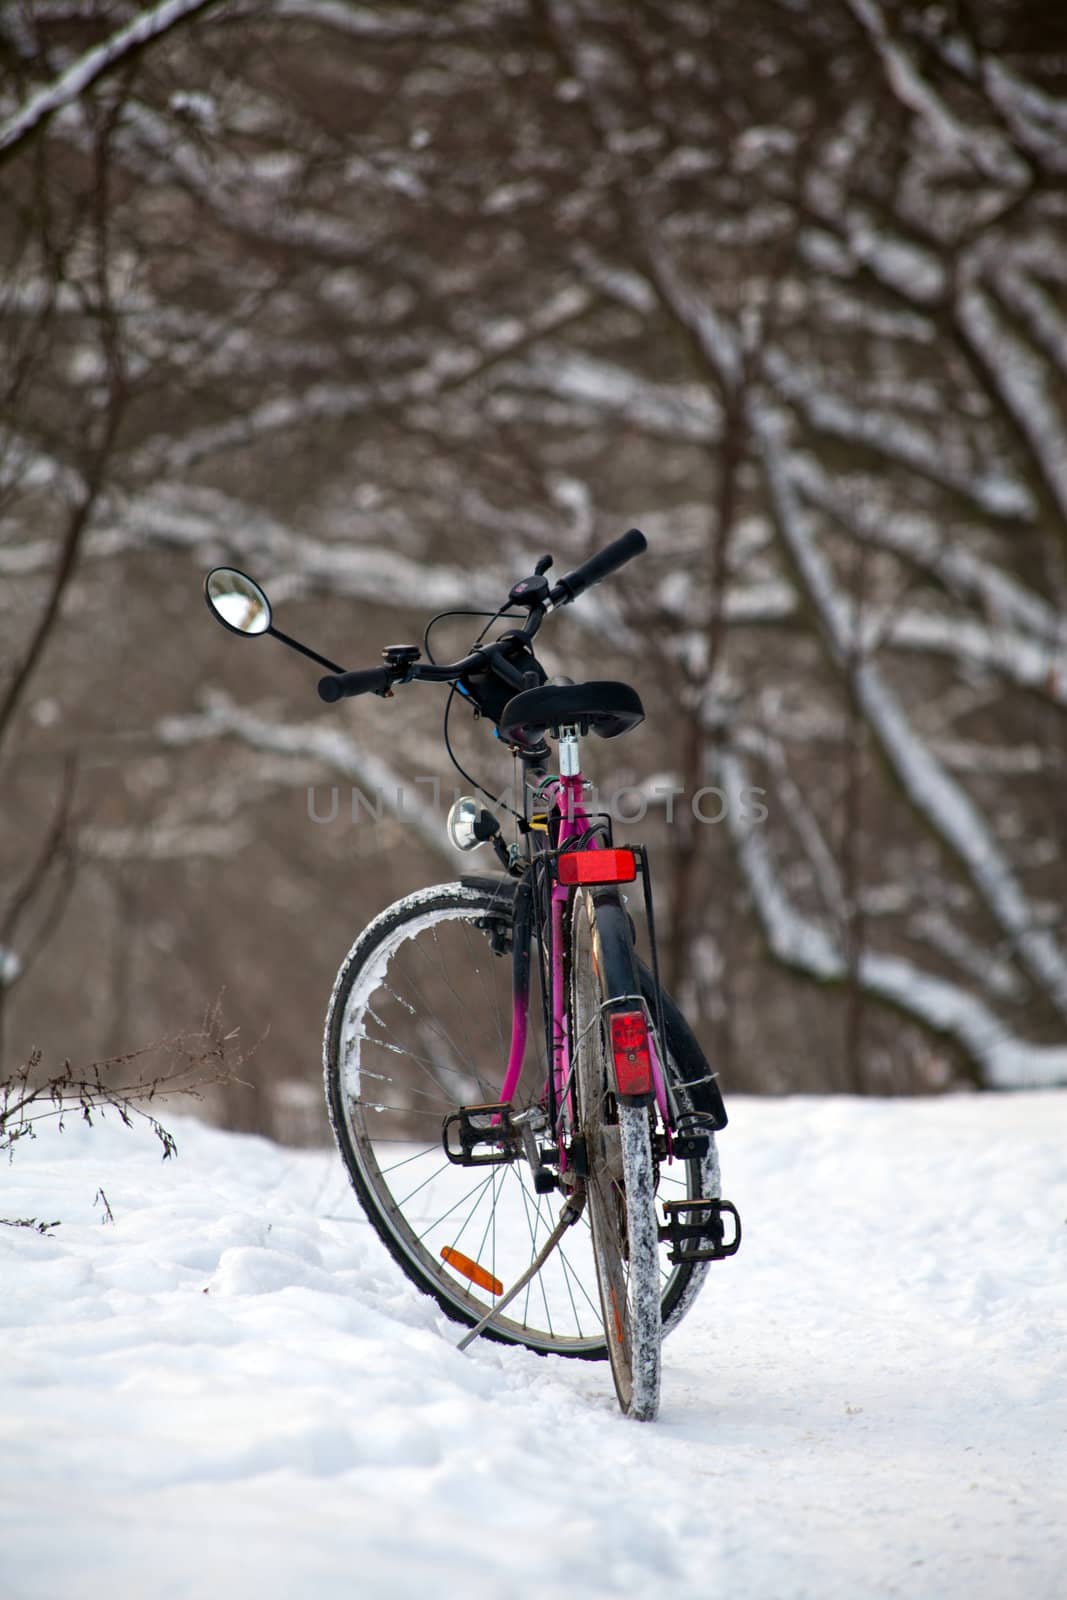 Bikes standing on snowy road in the woods
